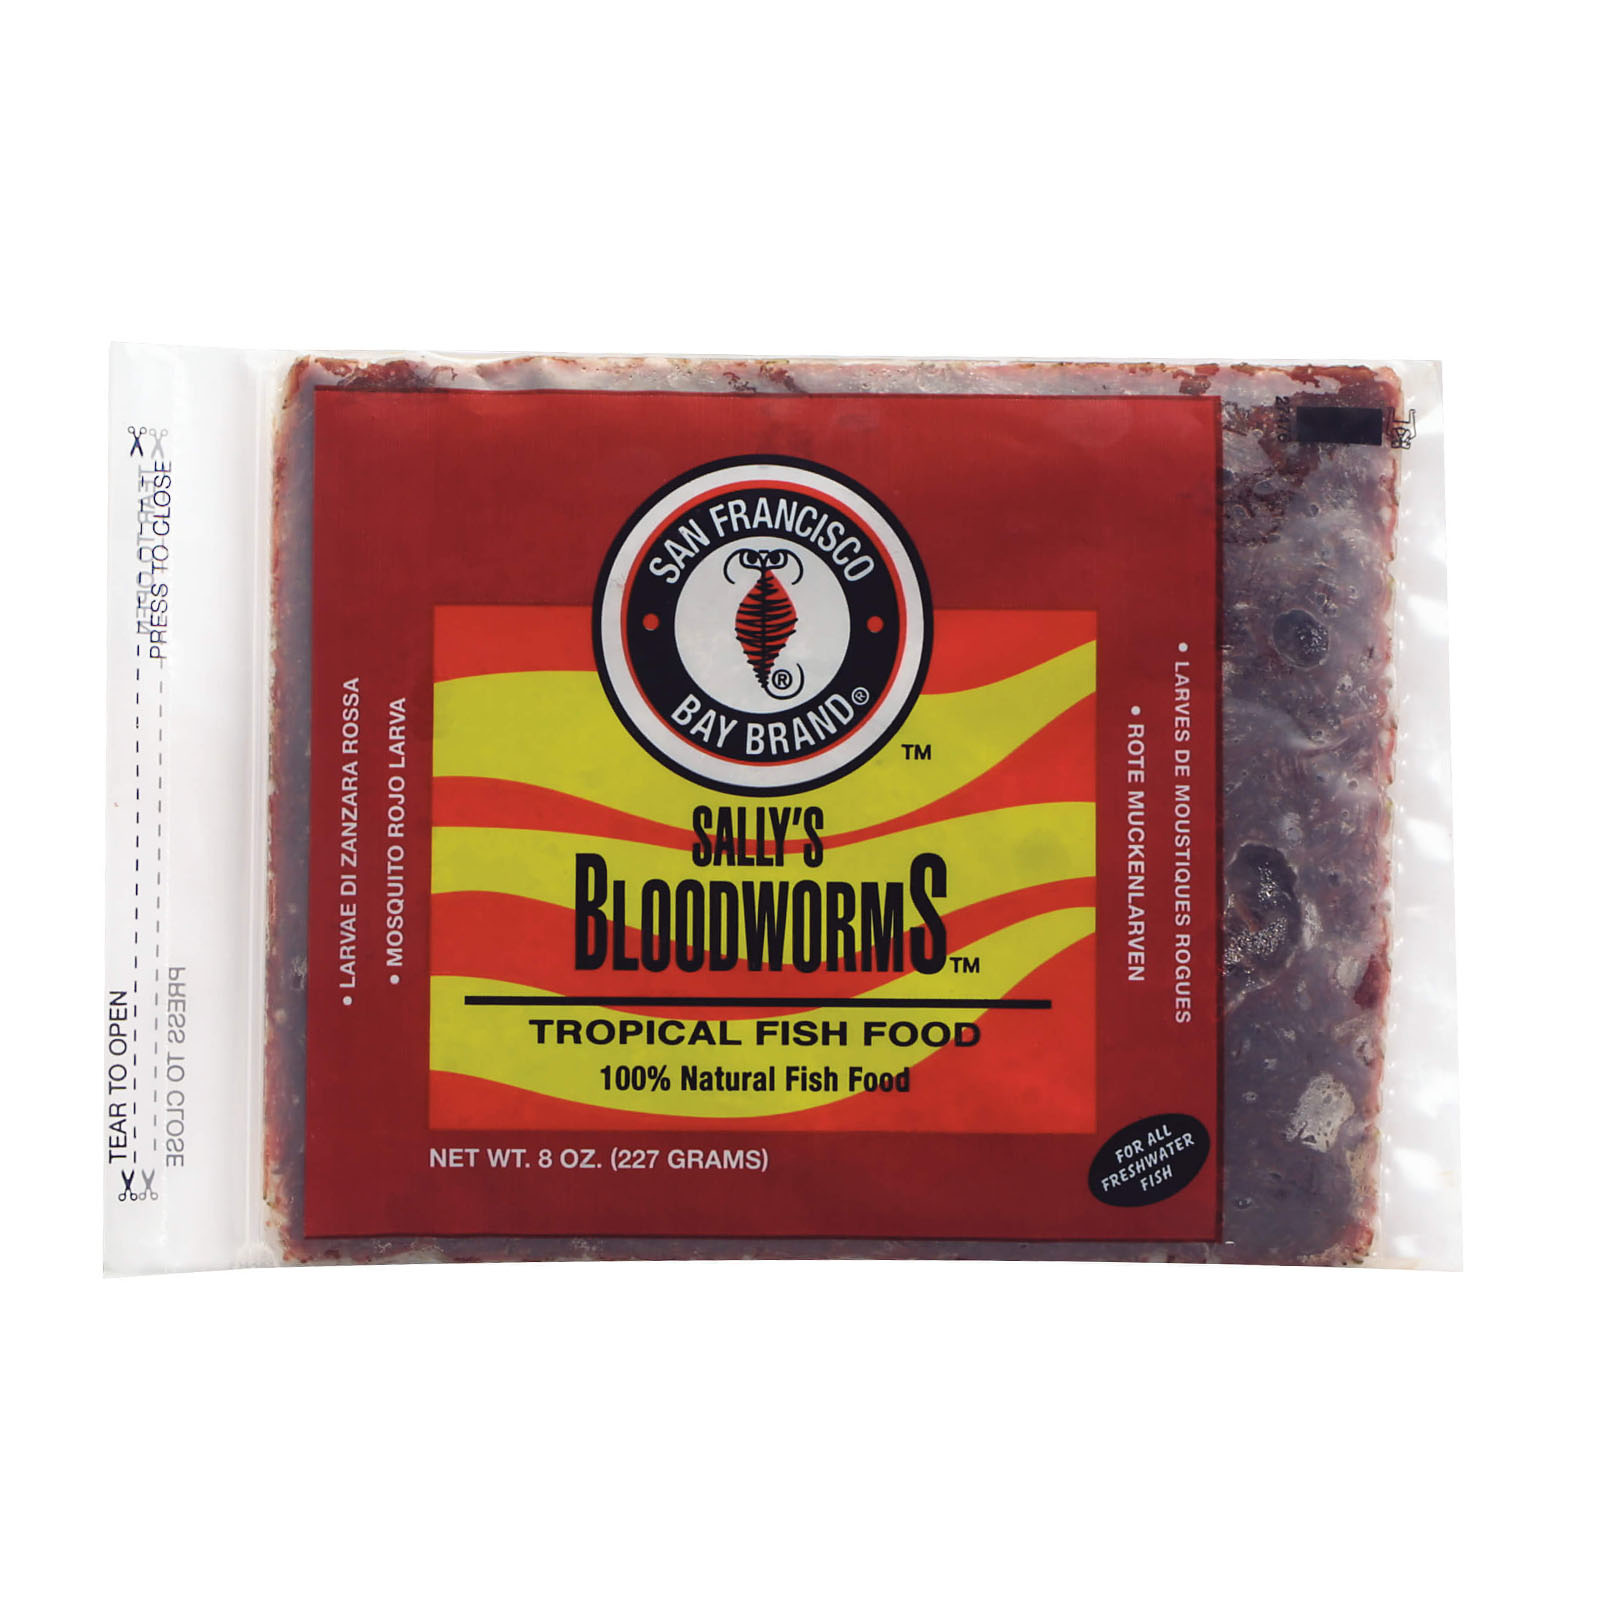 Bloodworms Flat Pack